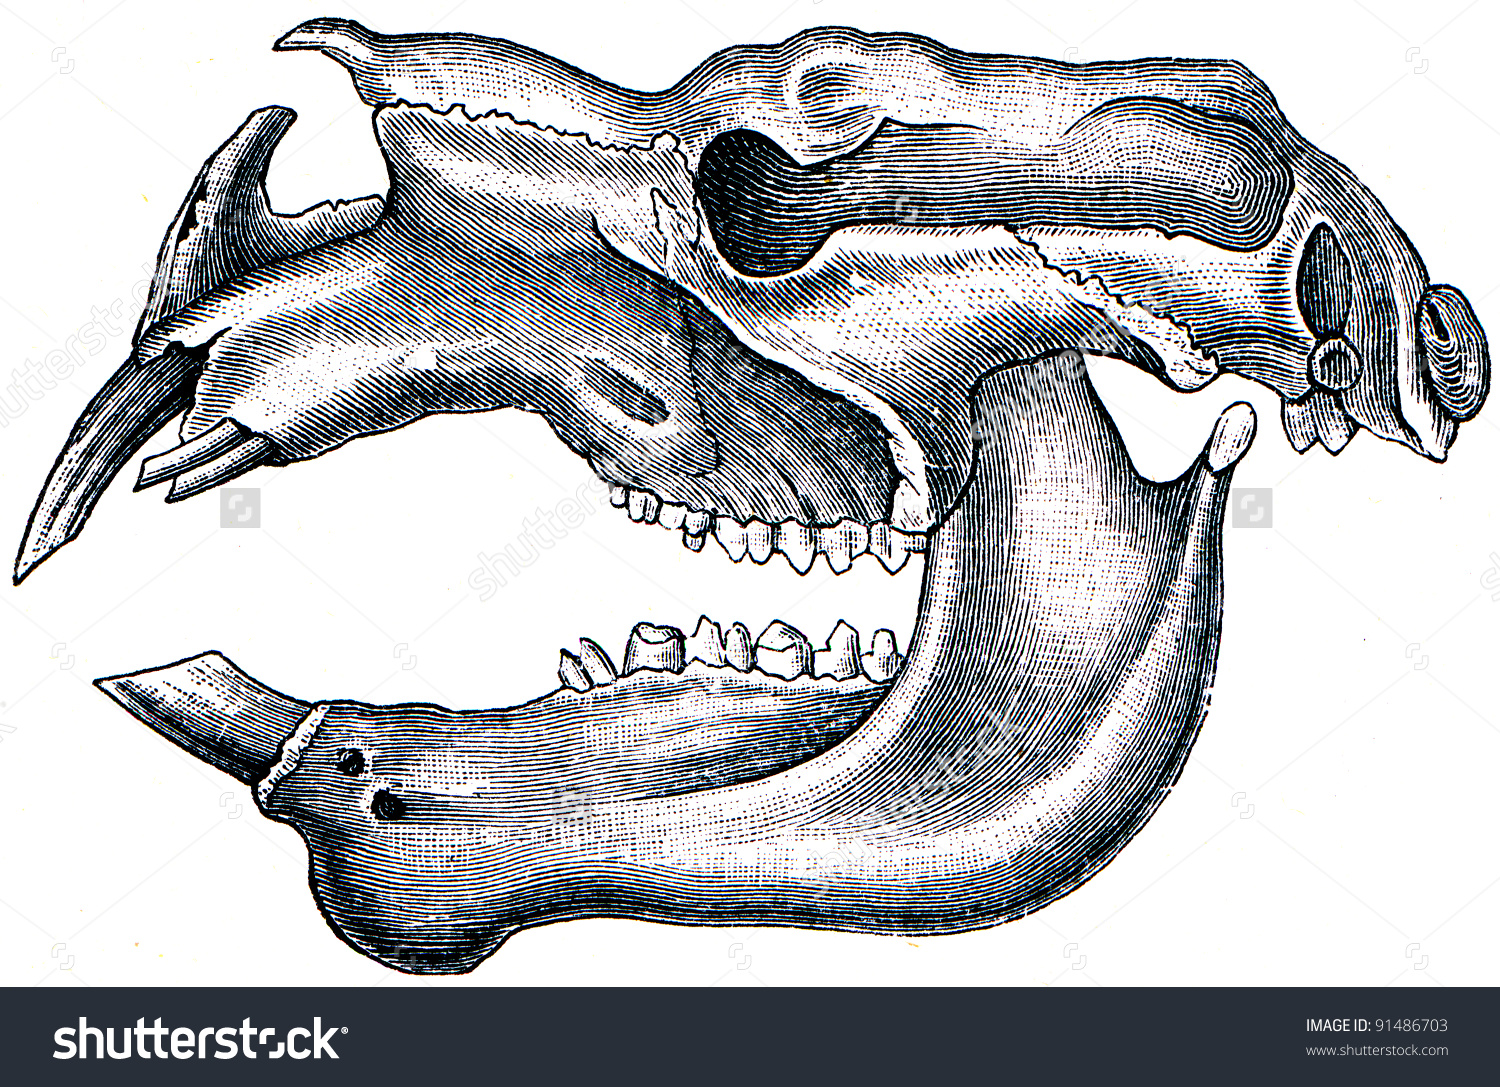 The Diprotodon clipart #1, Download drawings